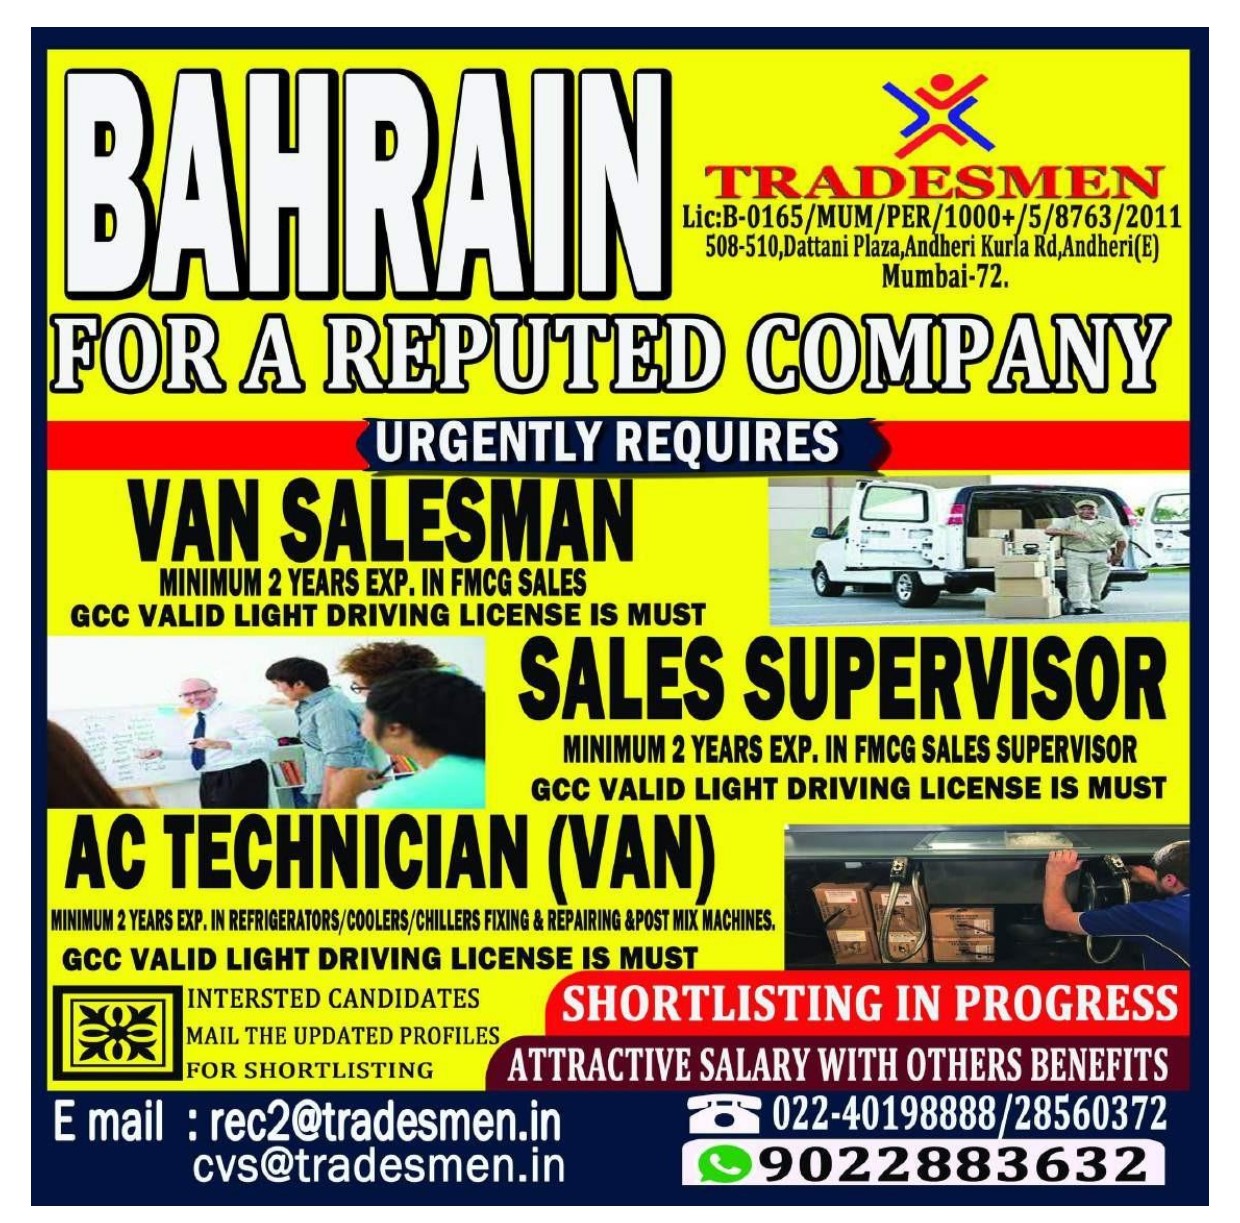 Looking for Reputed Co. for Bahrain 